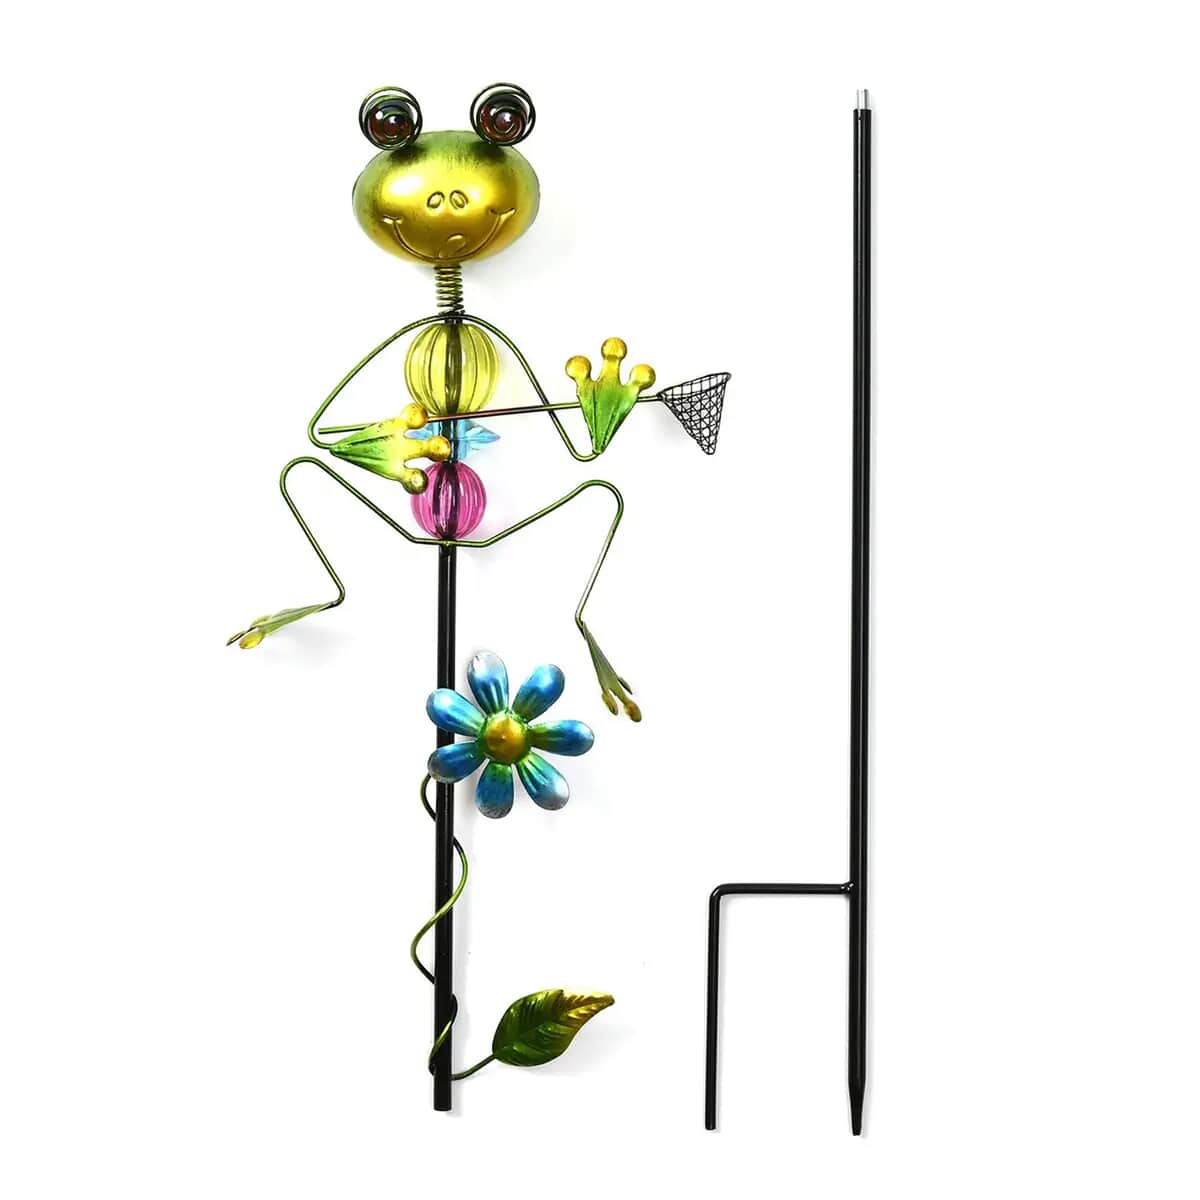 Green and Blue Color Frog with Rush-Up Pattern Outdoor Garden Decoration